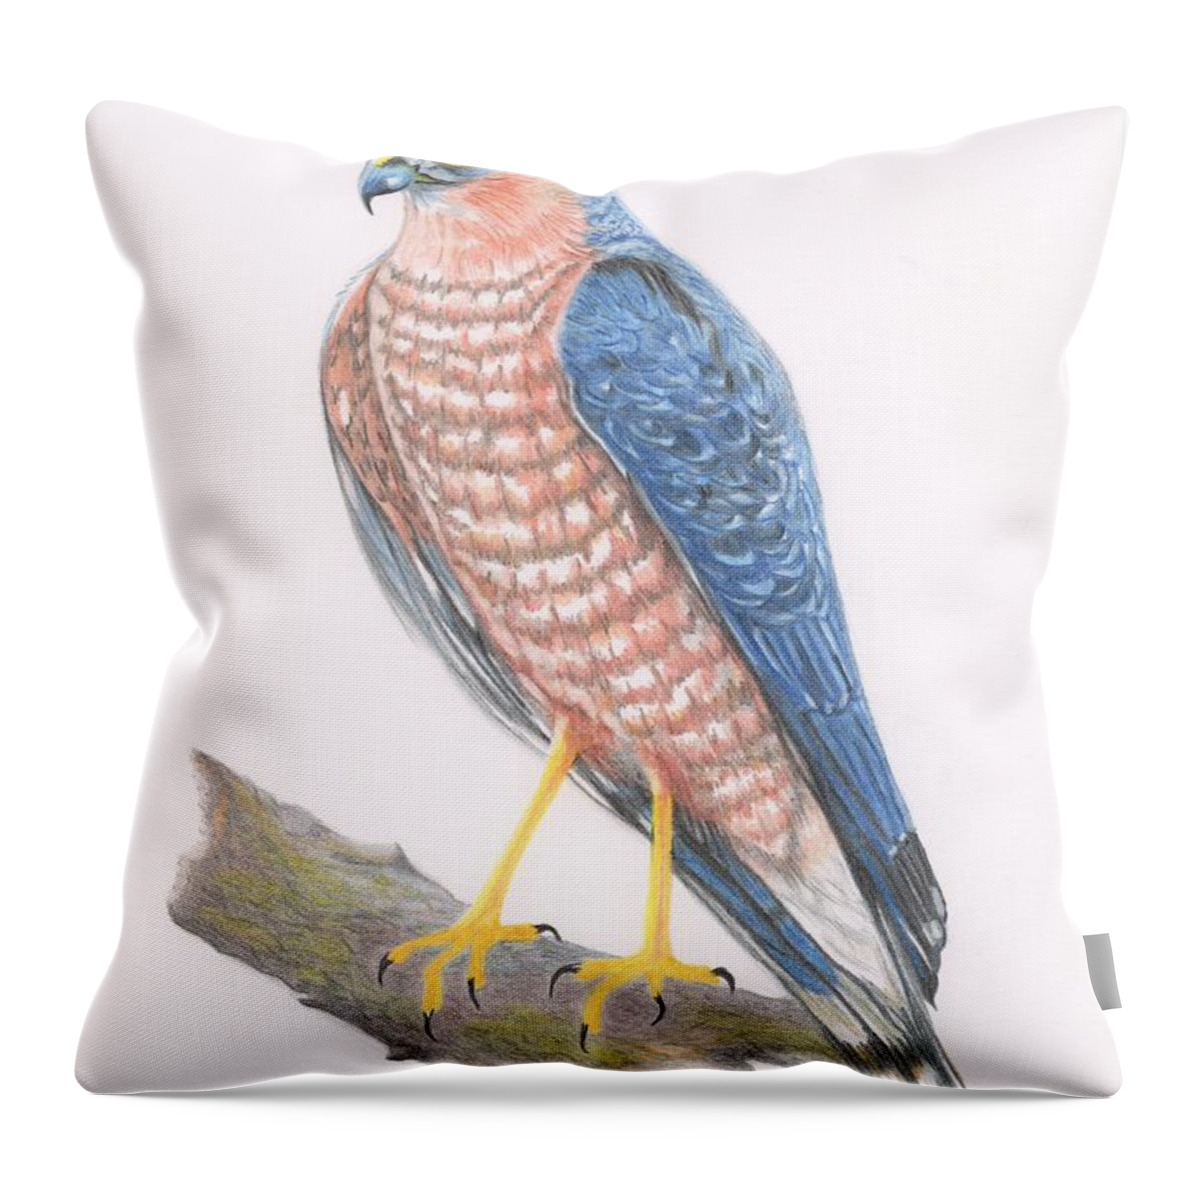 Sparrowhawk Throw Pillow featuring the drawing Sparrowhawk by Yvonne Johnstone